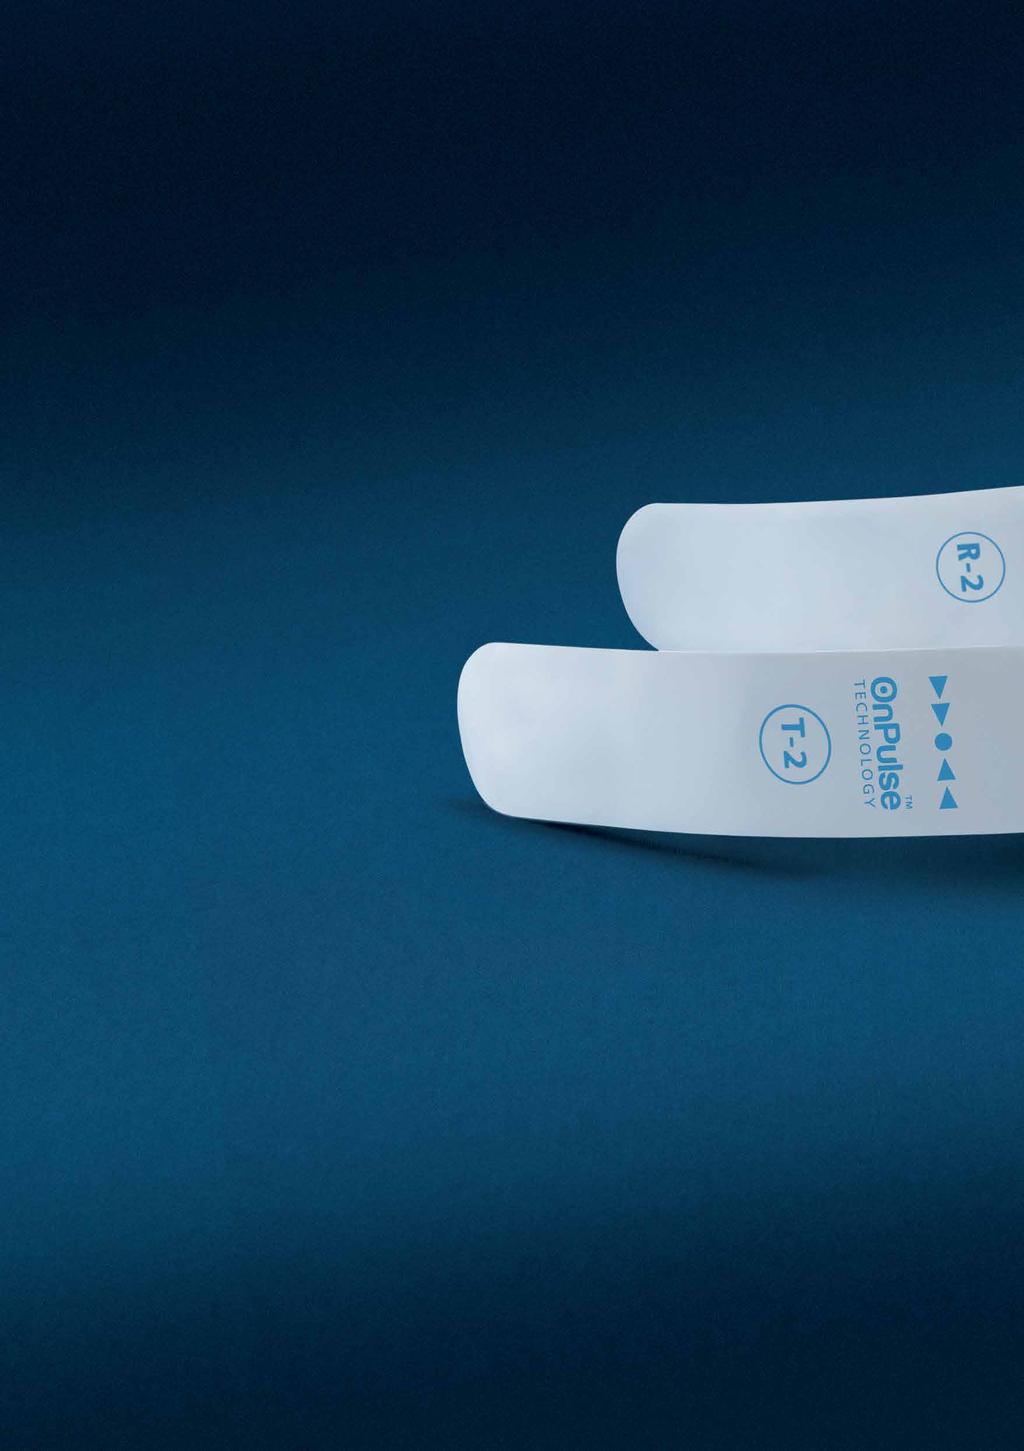 Increased blood circulation promotes wound healing from inside Self-contained and wearable, the geko device is: Simple and easy to use 13 Small and light (weighing just 10g) with no leads, or wires